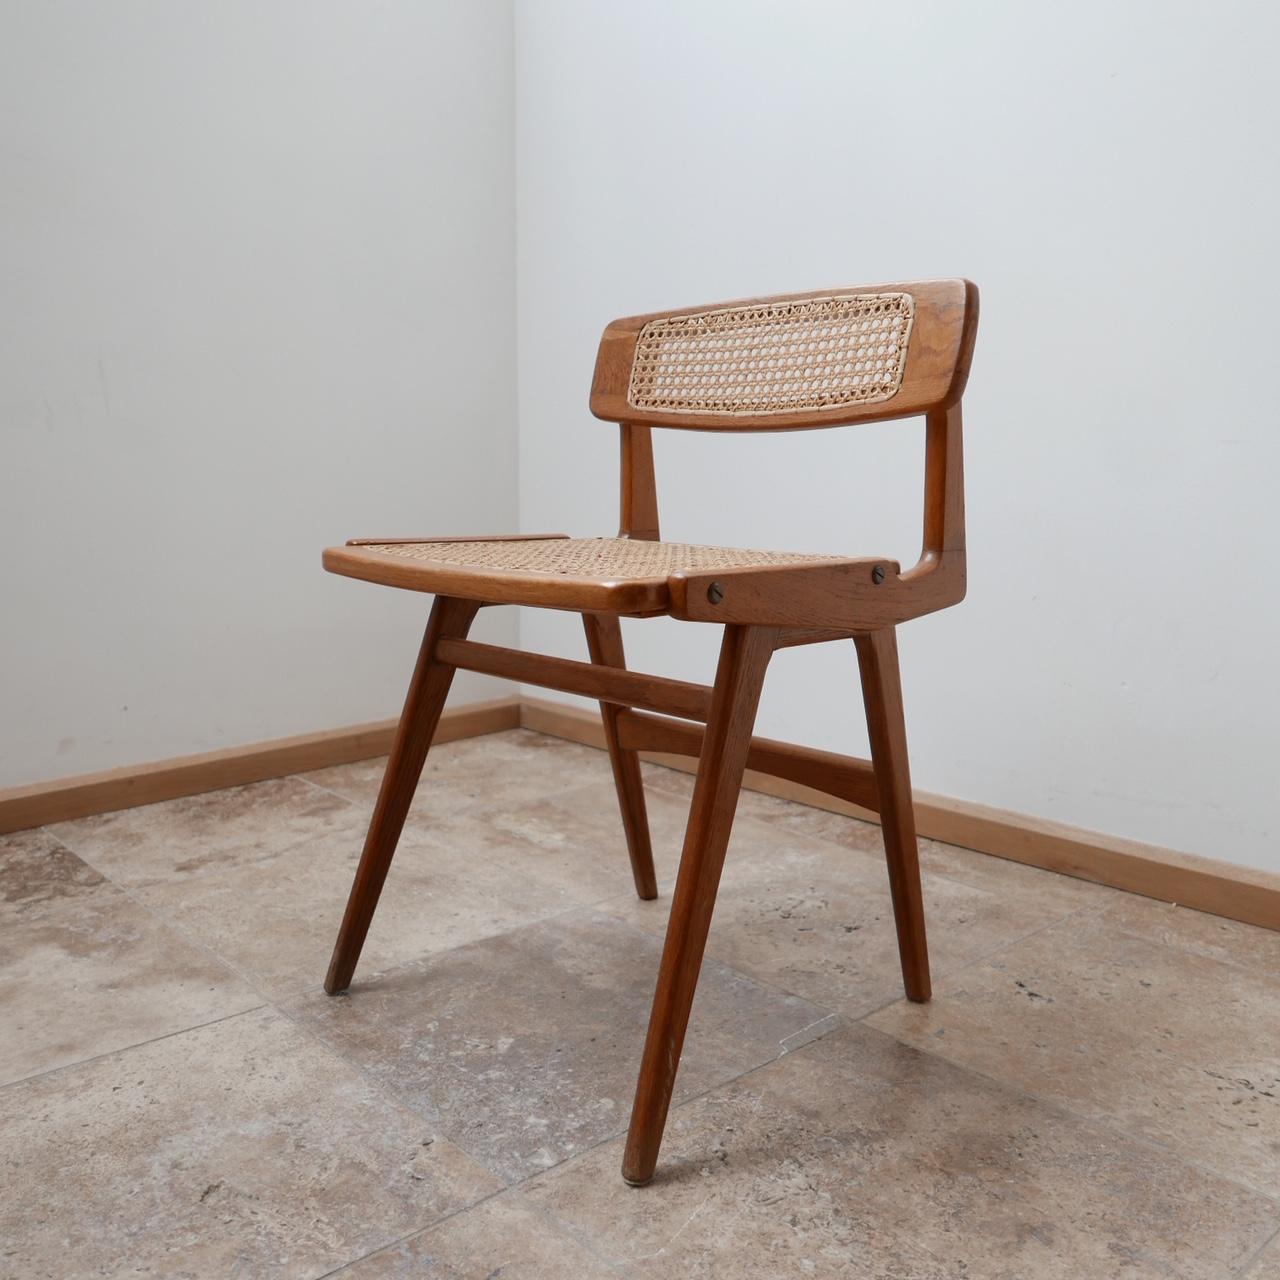 A scarce desk chair by Roger Landault,

France, circa 1950s.

Mahogany and cane.

Very stylish with amazing lines. 

The cane remains in near perfect condition, there may be one or two lines that have split but they are barely noticeable and